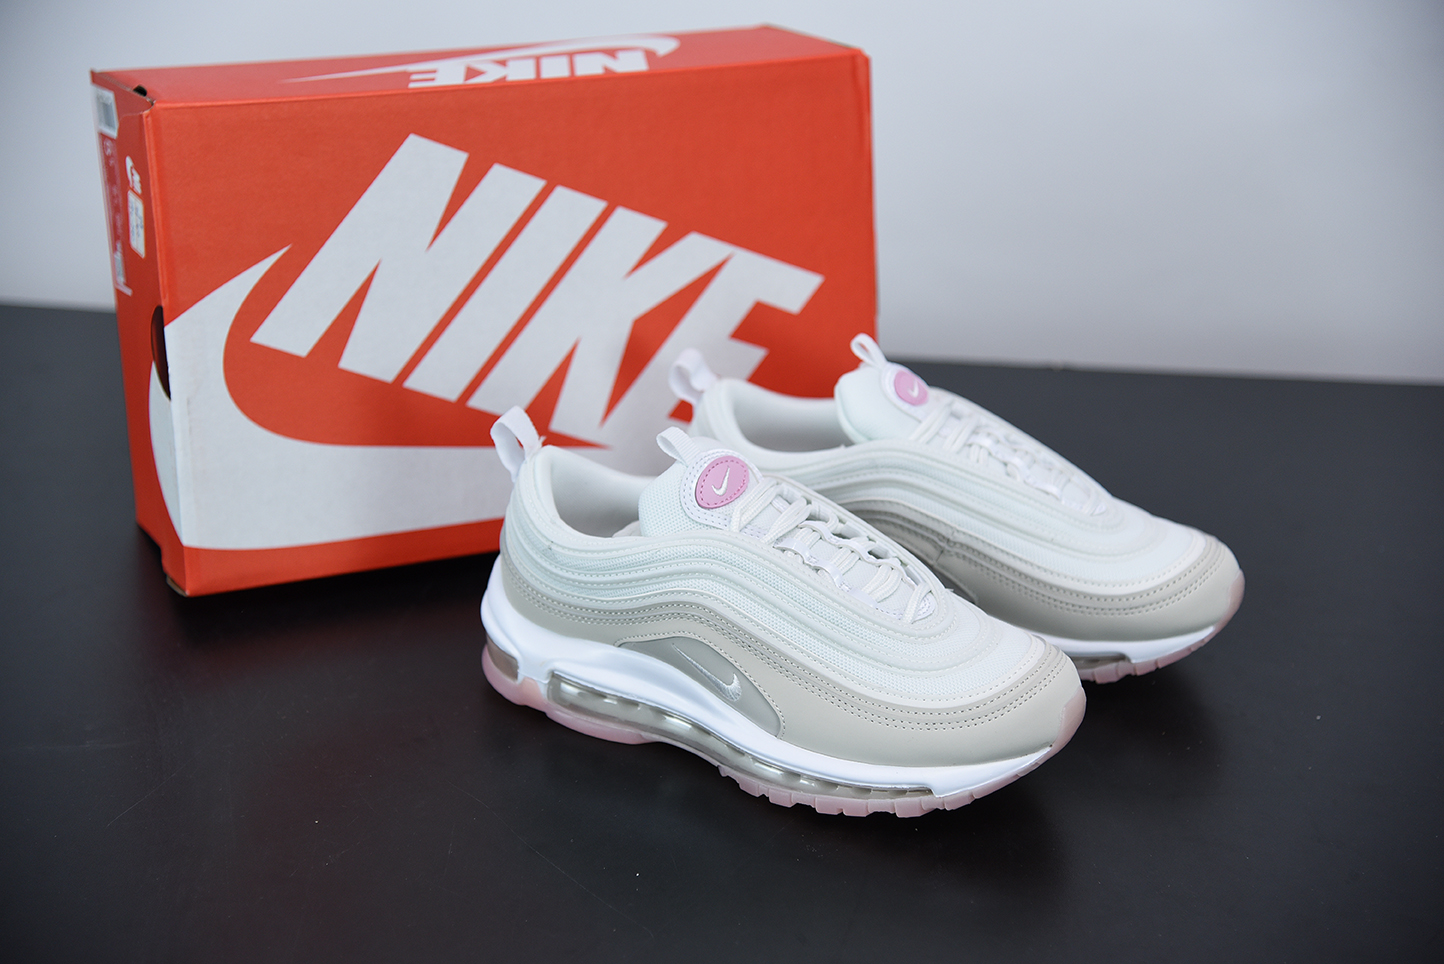 Nike Air Max 97 White Pink CT1904-100 For Sale – The Sole Line